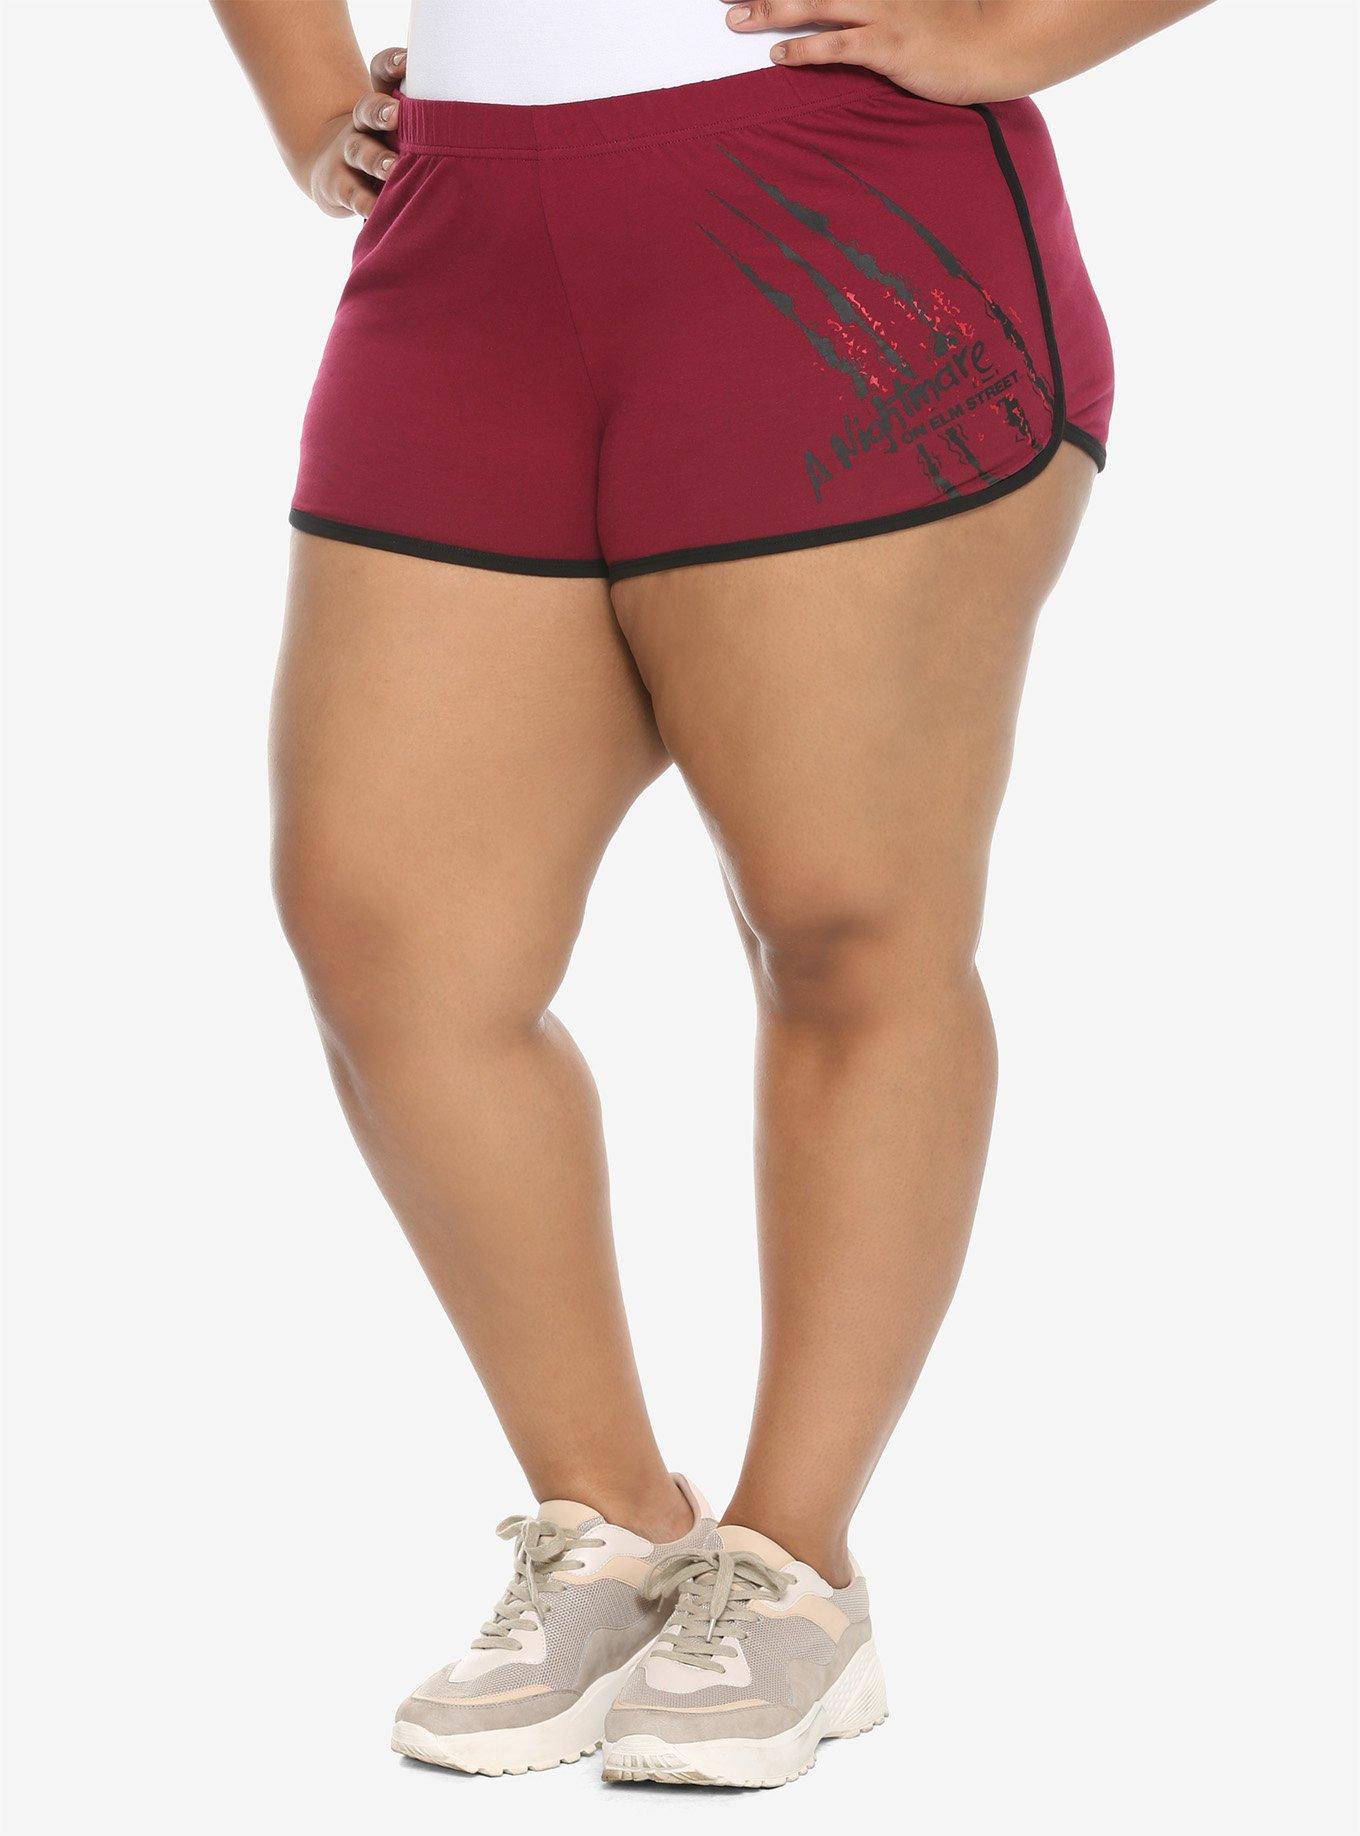 A Nightmare On Elm Street Girls Soft Shorts Plus Size, RED, hi-res